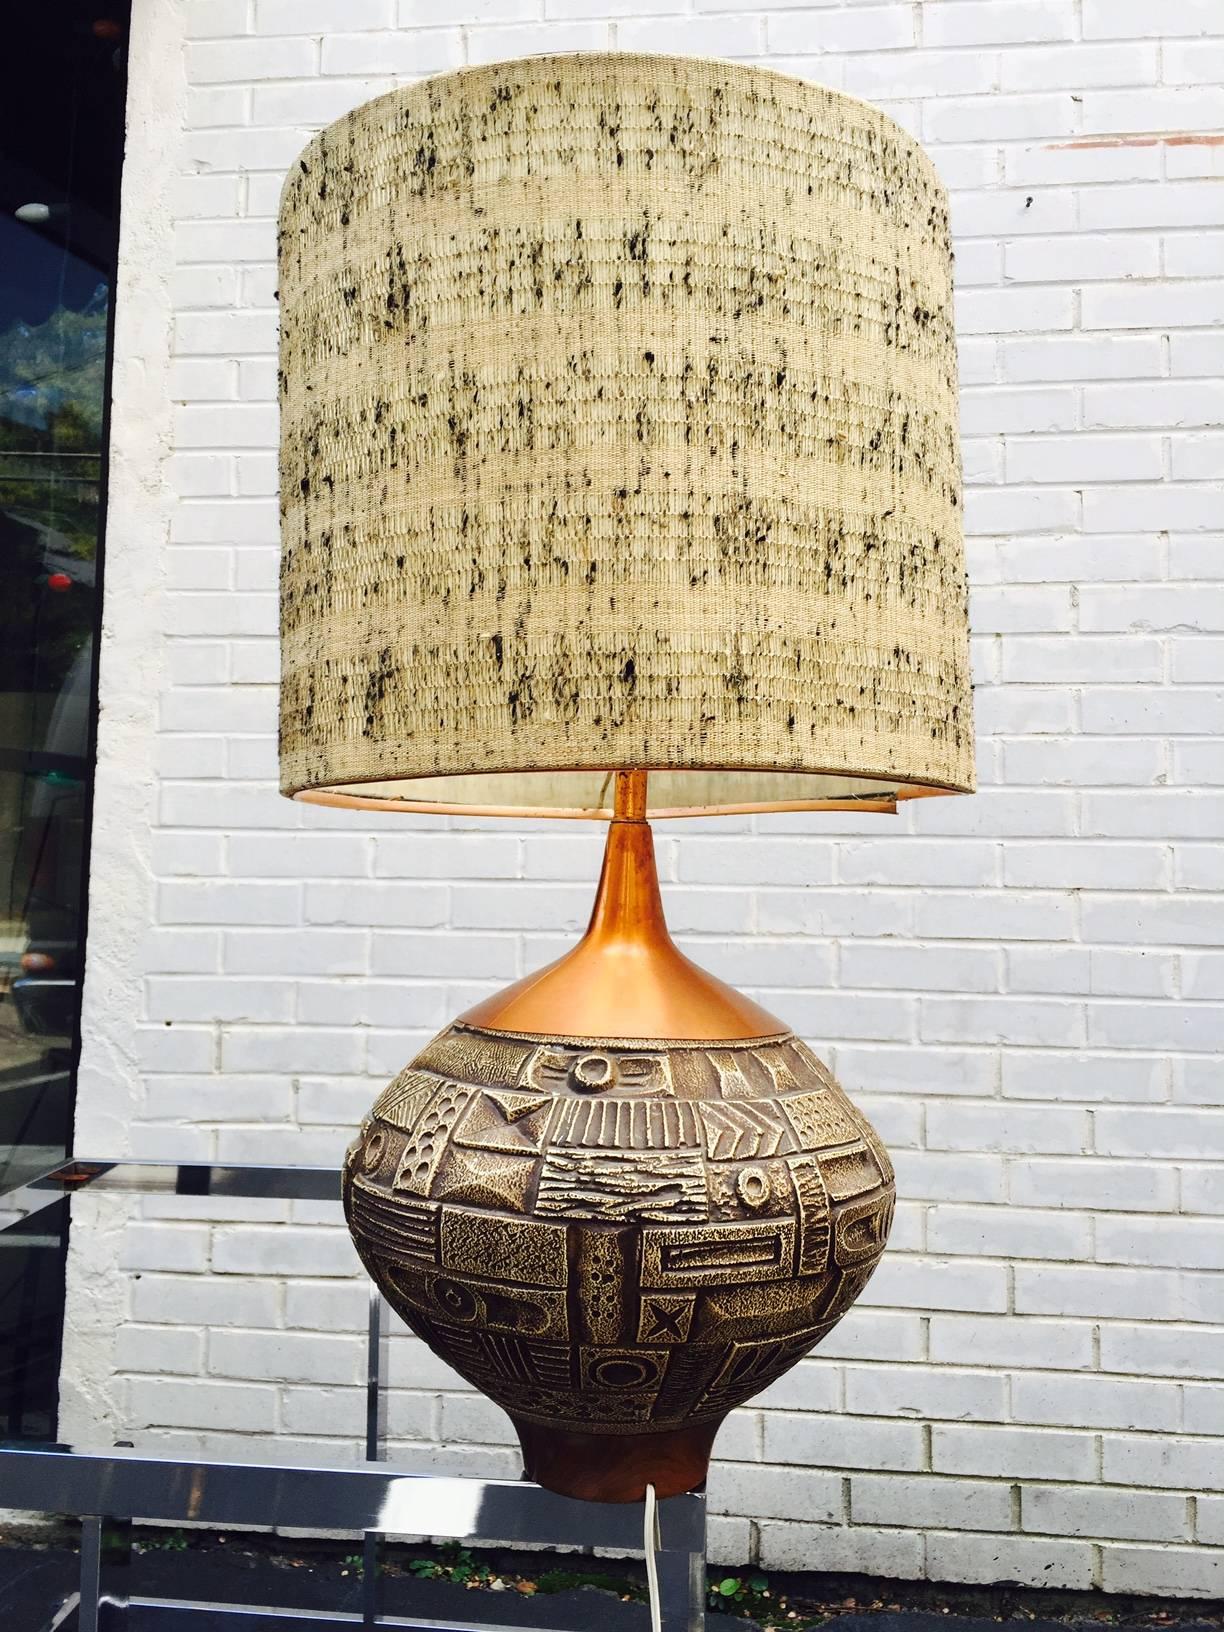 Mid-Century large sculptural pottery and copper table lamp in the style of martz. This unique design is comprised of a sculpted bulbous pottery body with copper accents and turned wood base. Original shade is attached but could easily be replaced if